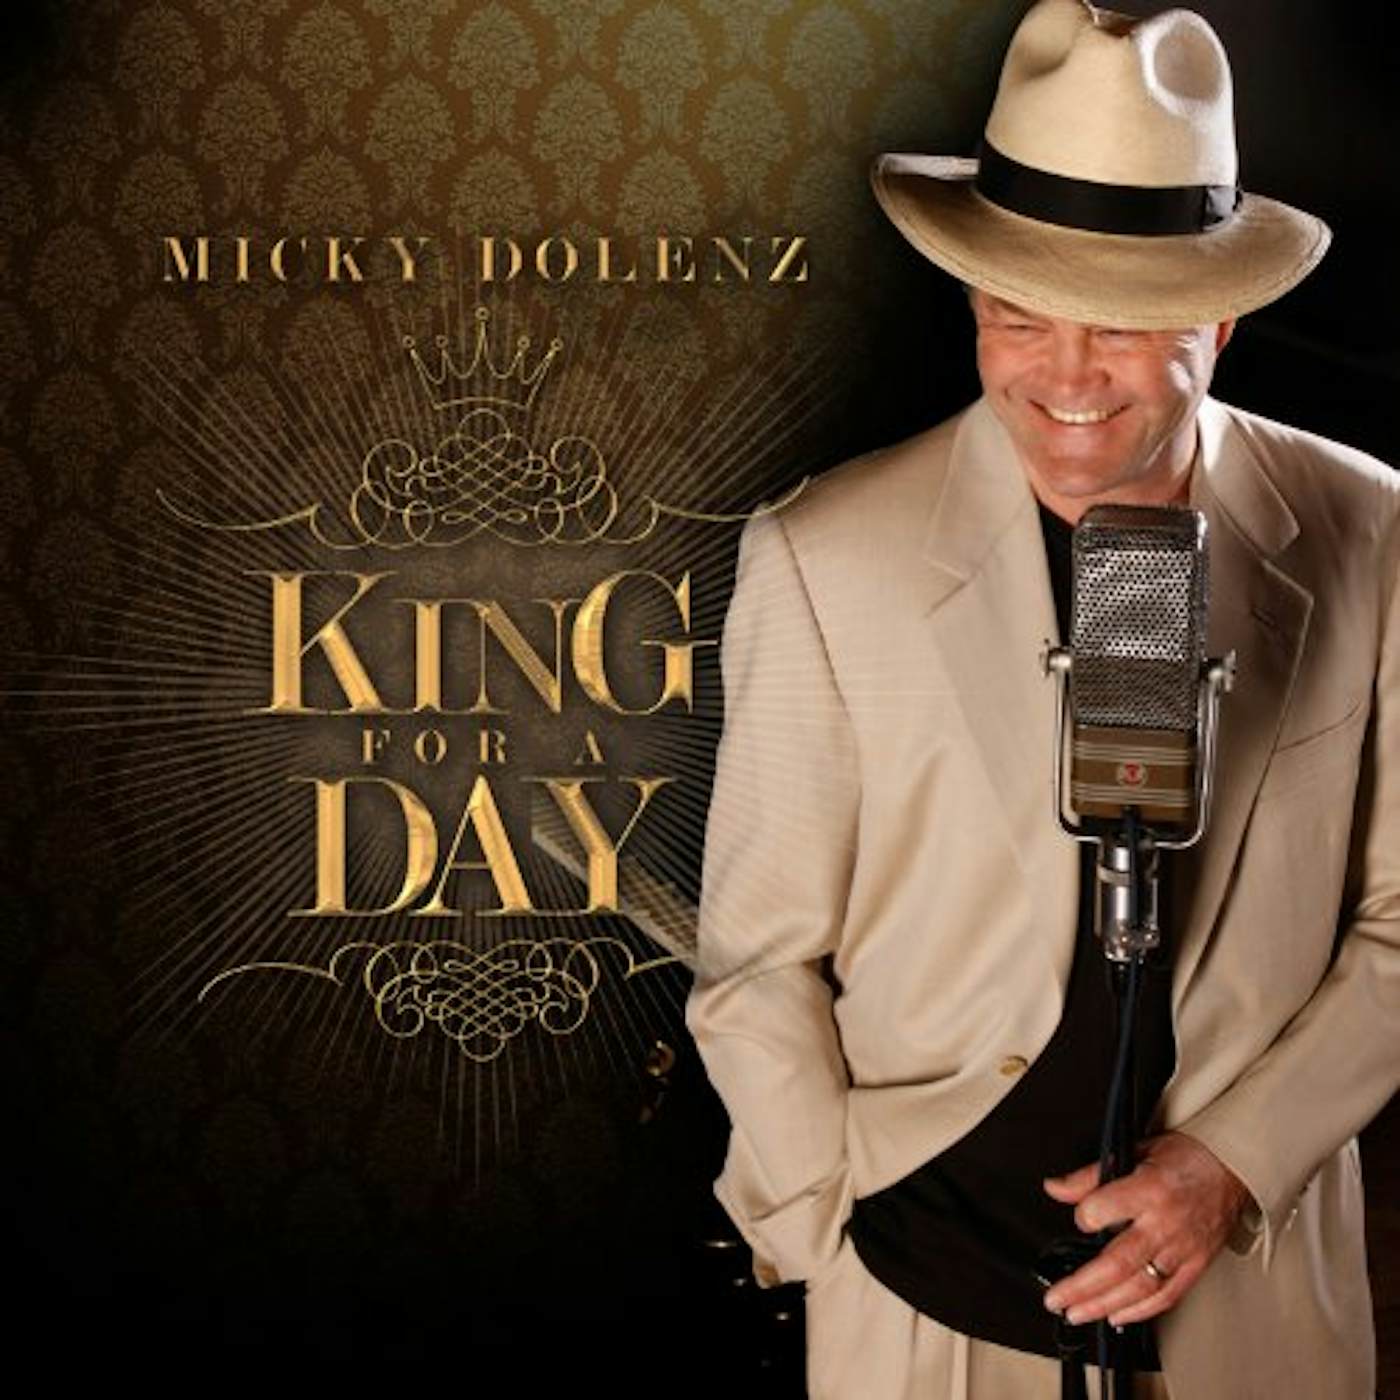 Micky Dolenz KING FOR A DAY CD